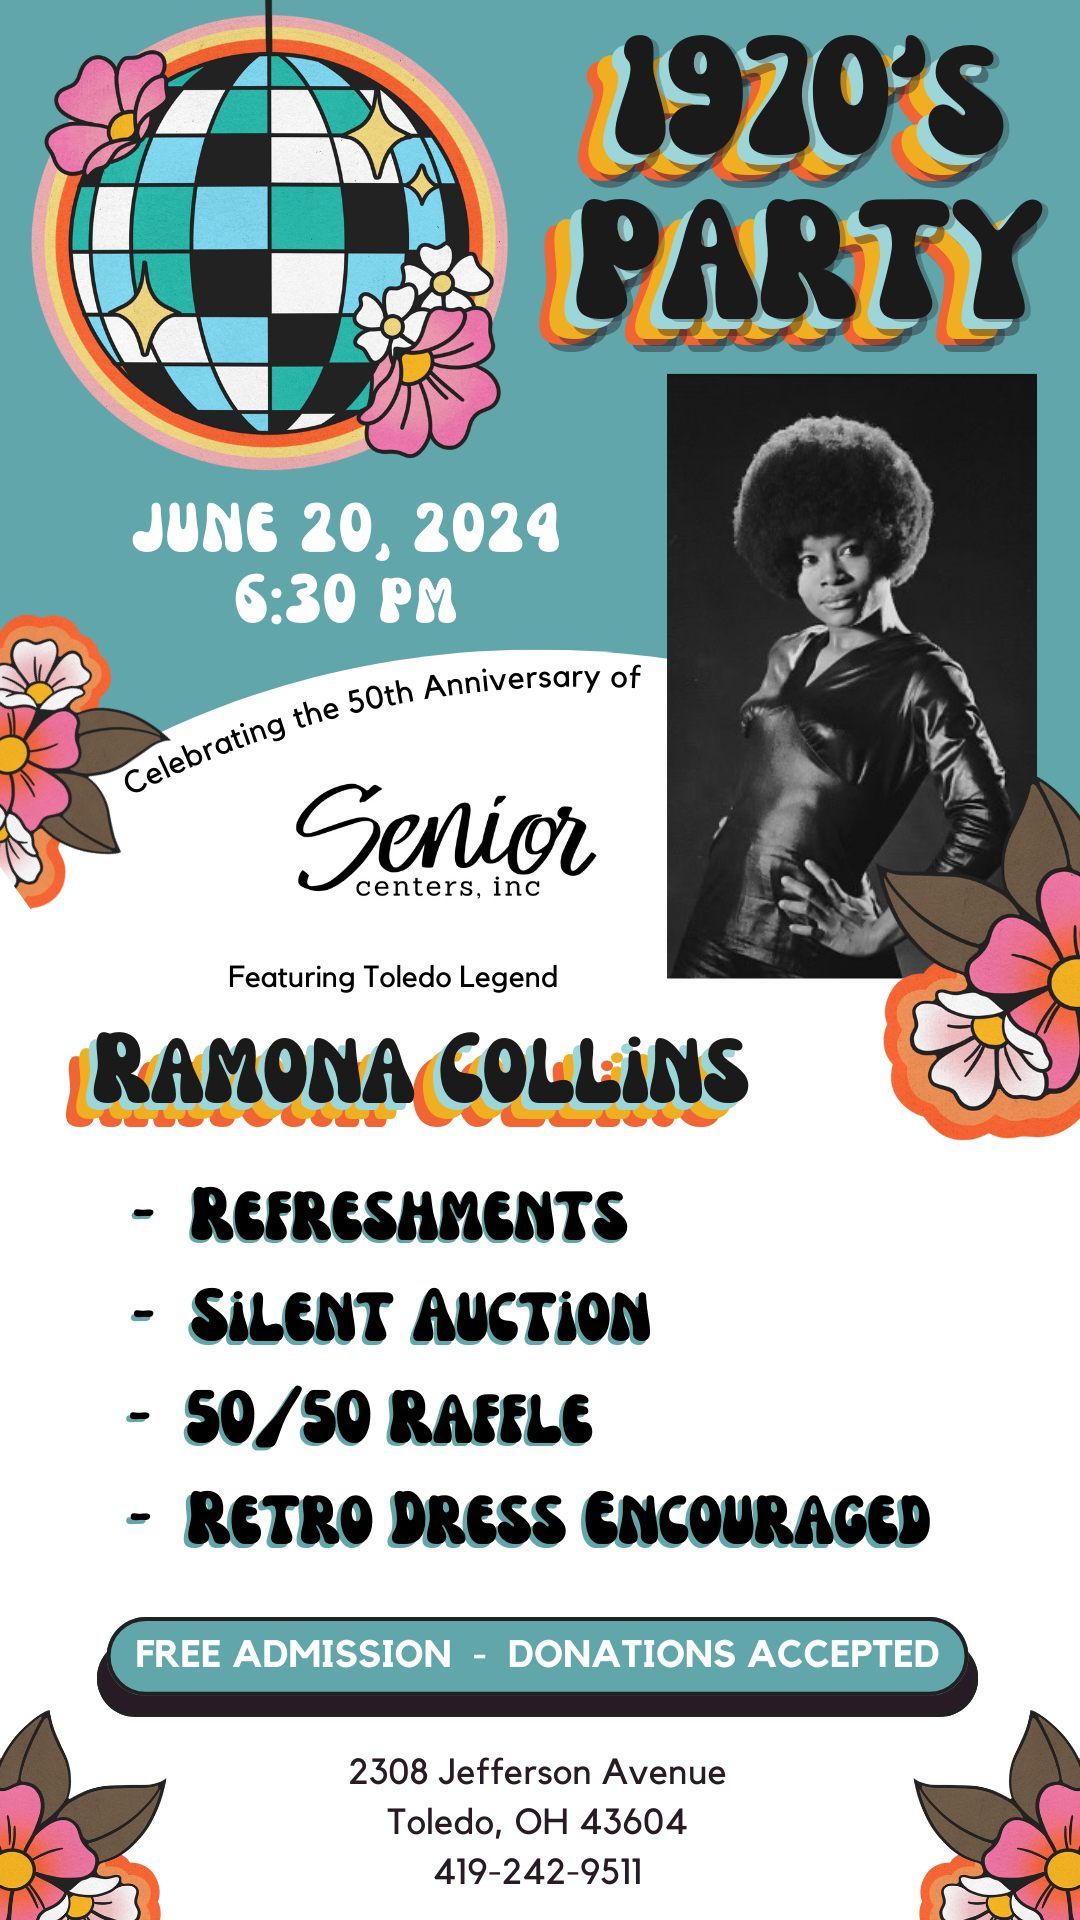 1970's Party: 50th Anniversary Celebration for Senior Centers, Inc.